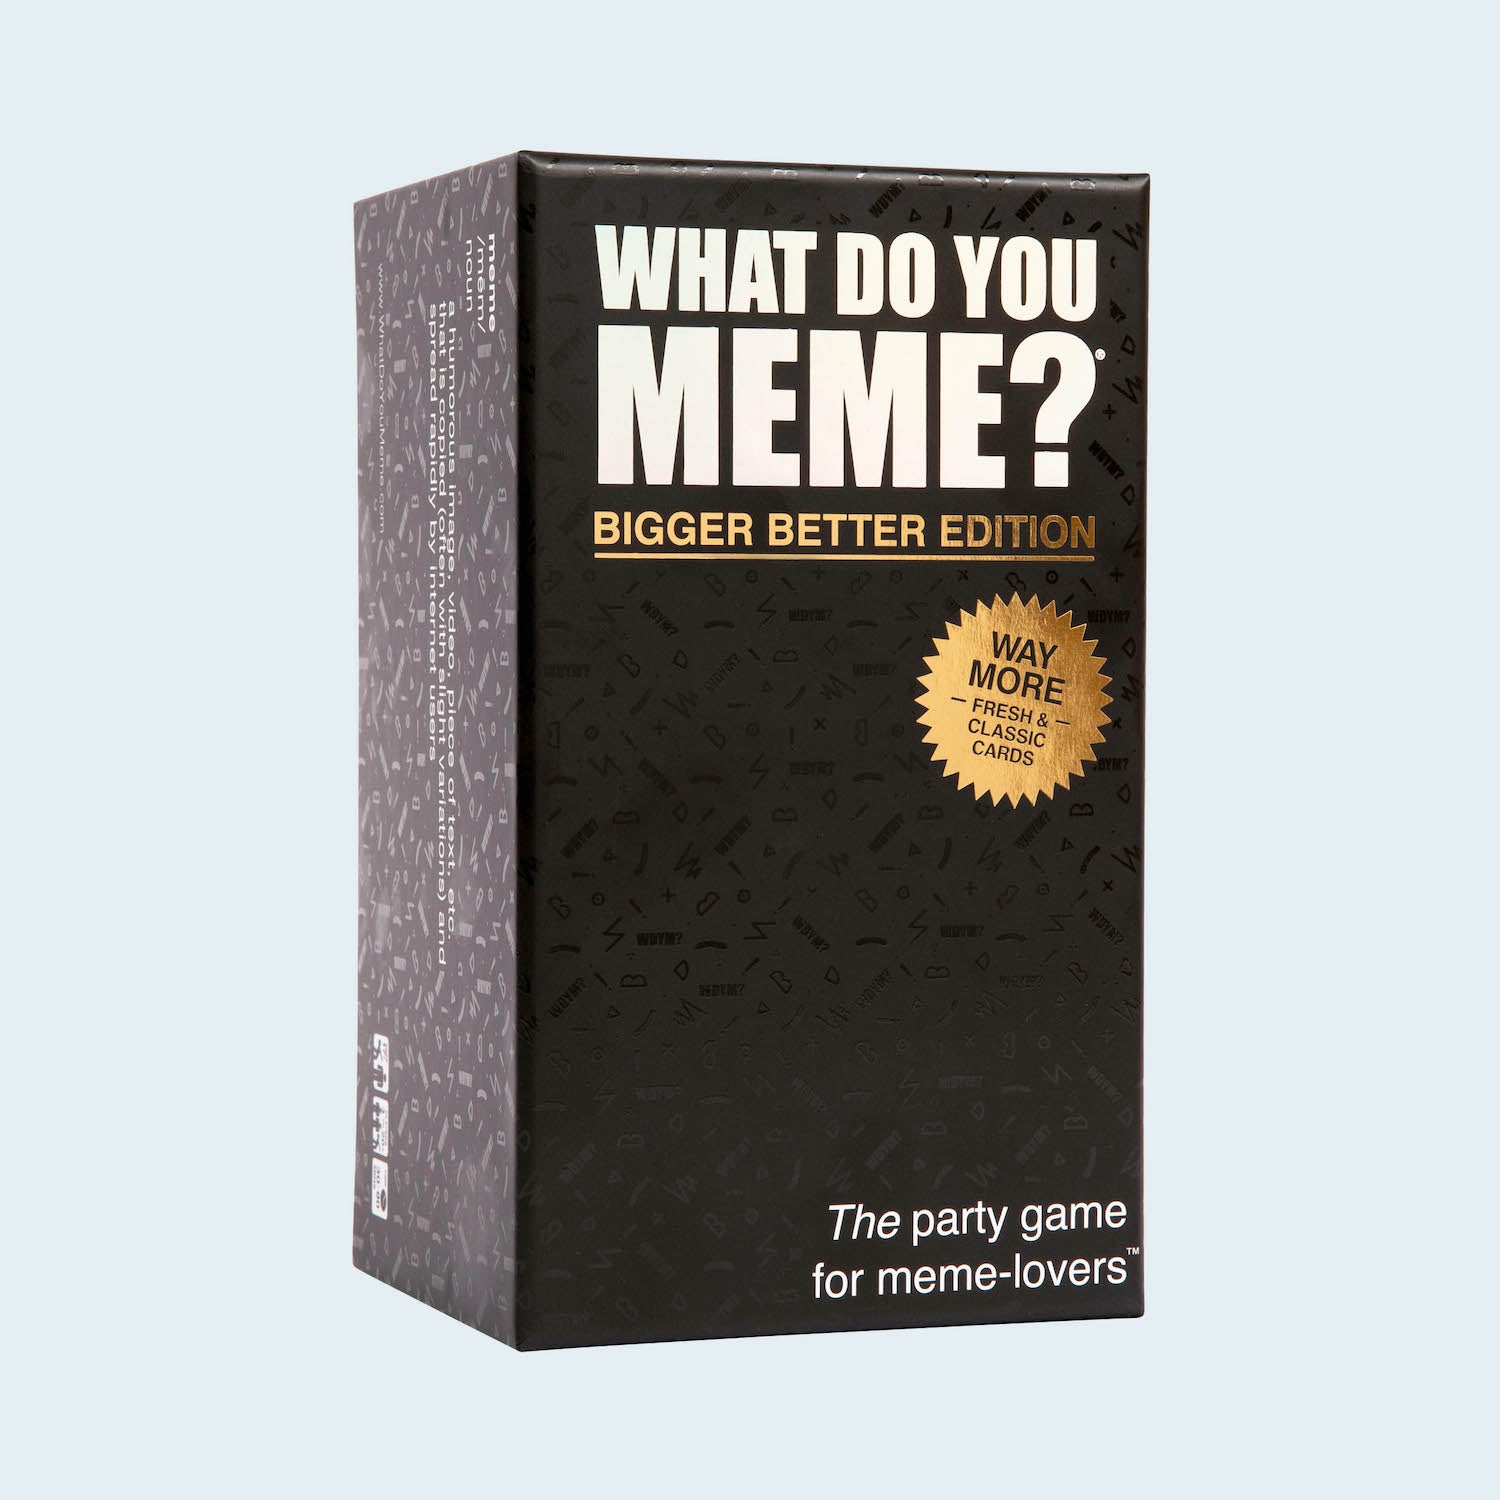 what-do-you-meme-bigger-better-edition-game-box-and-game-play-02-what-do-you-meme-by-relatable